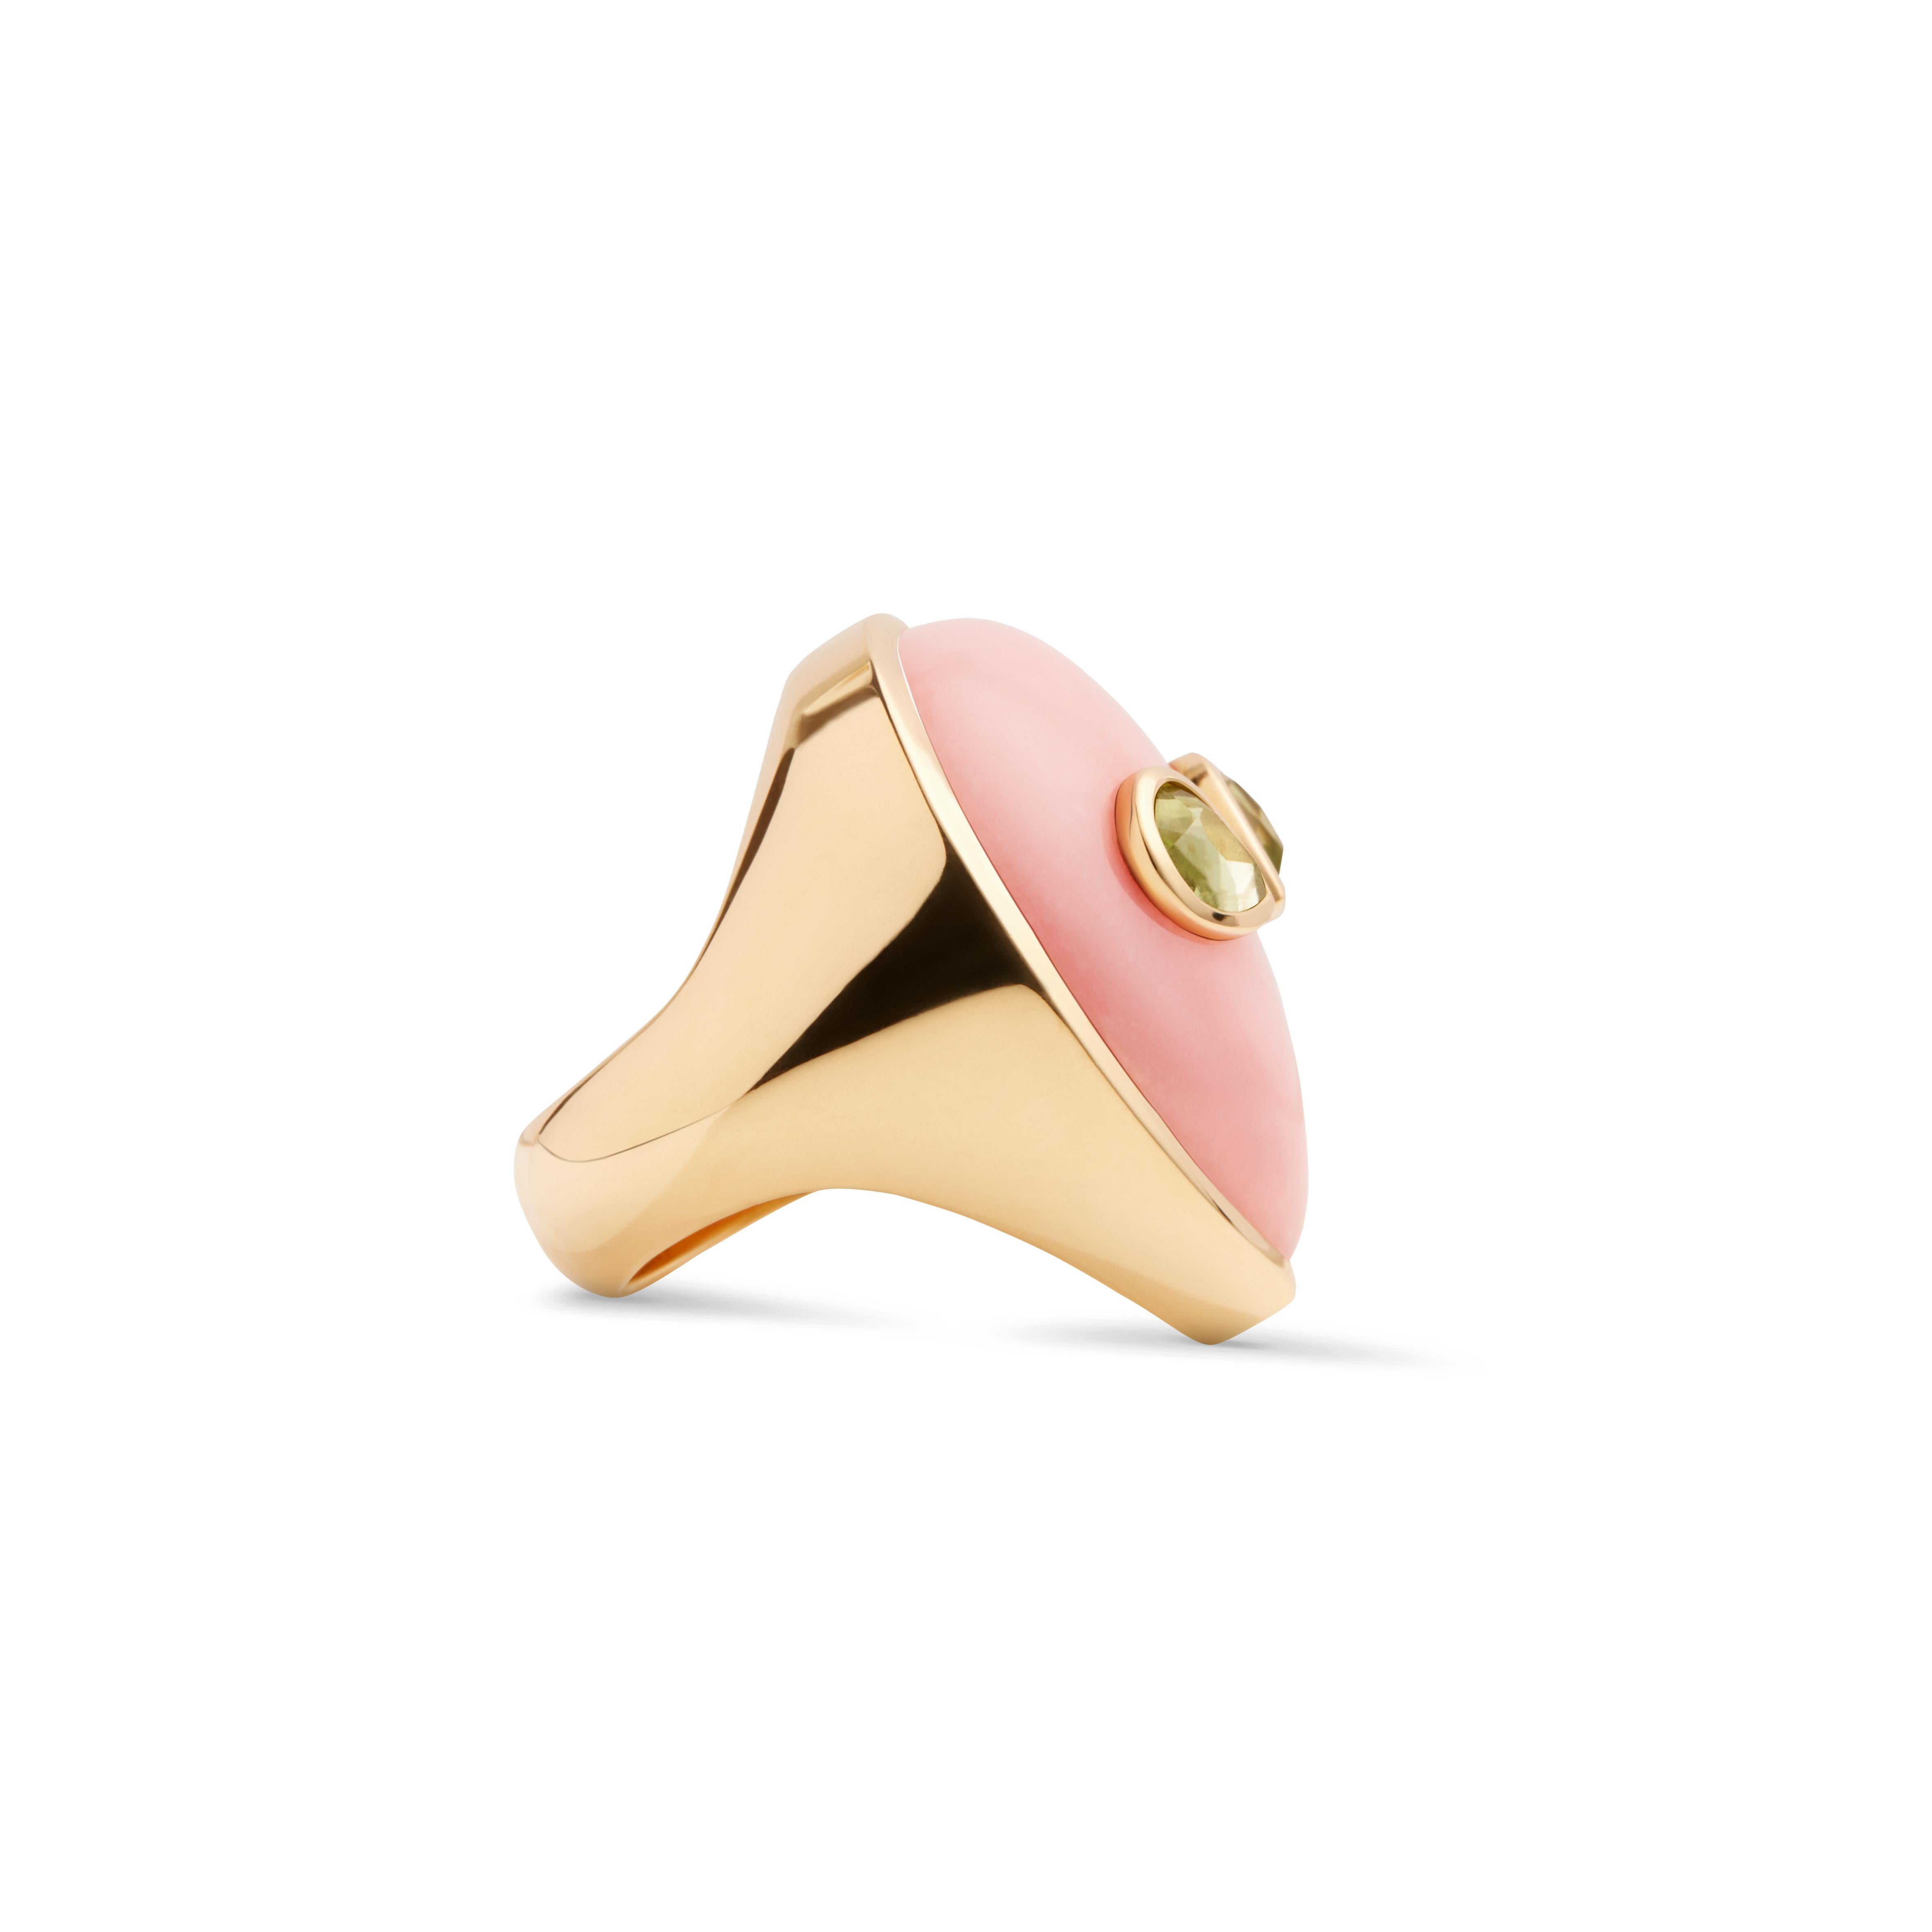 A 90’s obsession with aliens and a minimalist aesthetic are the inspiration behind this one of a kind ring. Bright colored stones imitate the fluorescent colors popular in the 90’s and bring life to this extraterrestrial face made of pink opal and